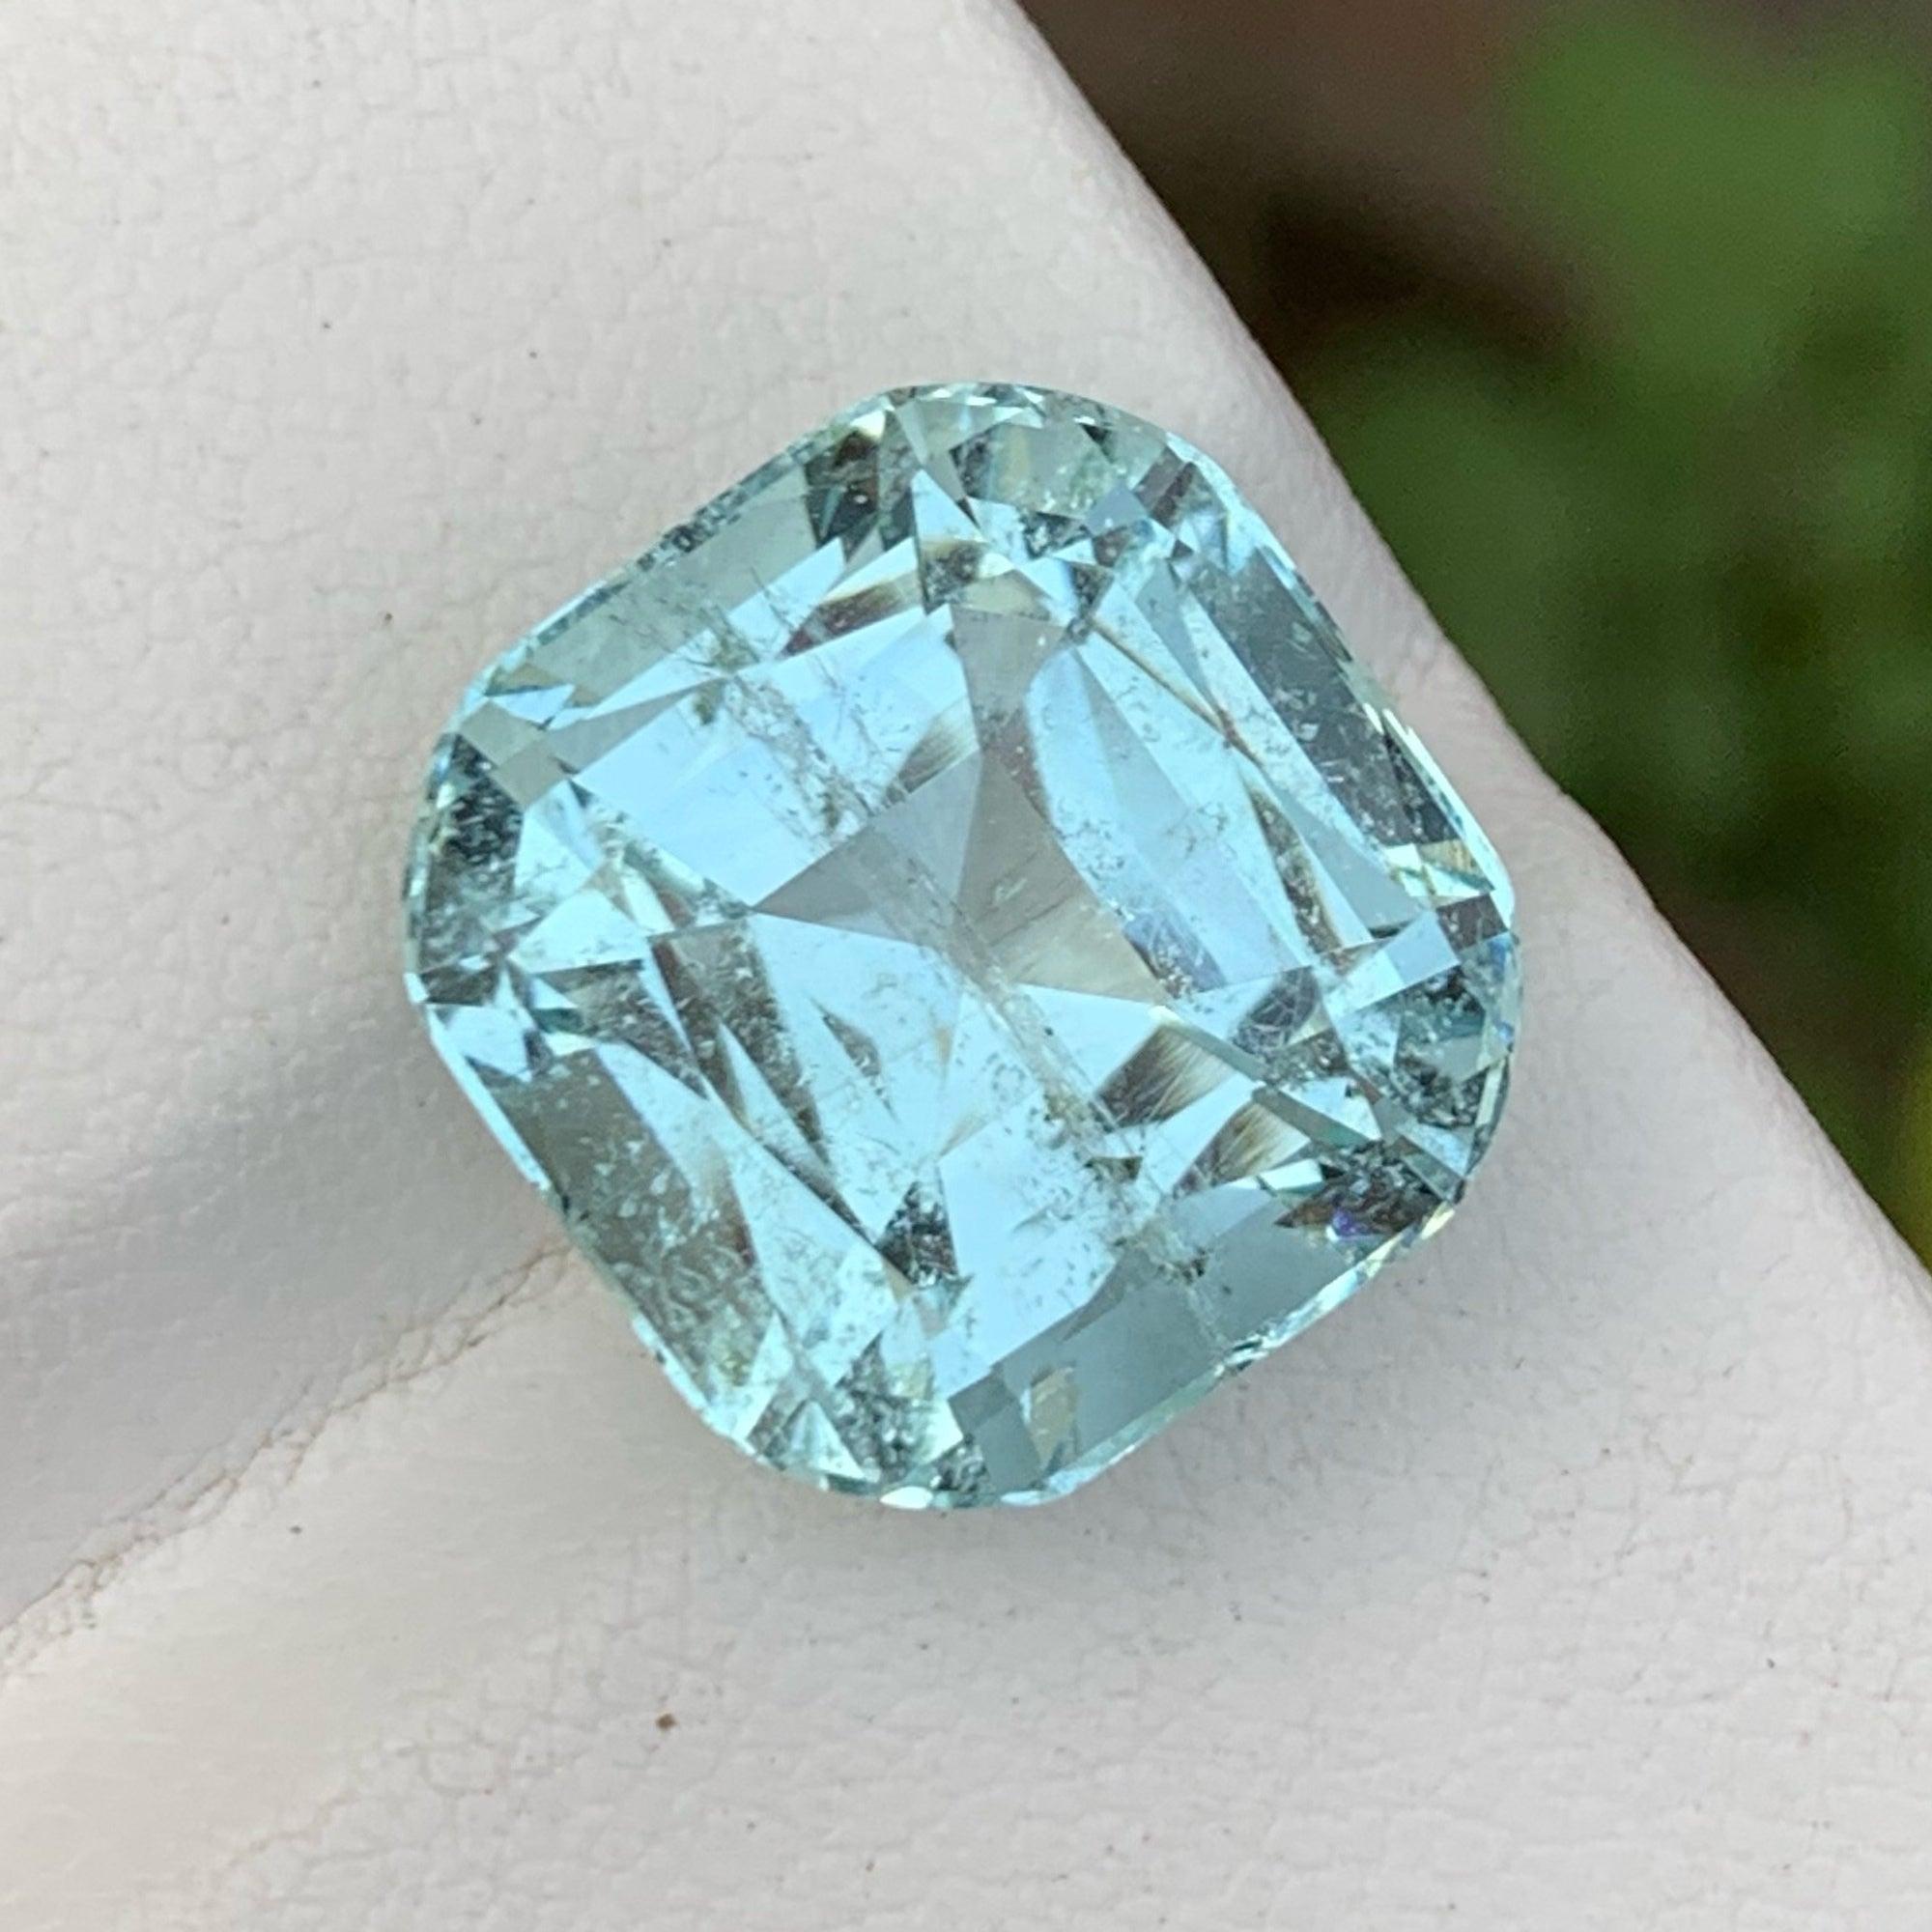 Fantastic Natural Aquamarine Gemstone of 13.20 carats from Pakistan has a wonderful cut in a Cushion shape, incredible lightblue color, Great brilliance. This gem is Included Clarity.

 

Product Information:
GEMSTONE NAME: Fantastic Natural